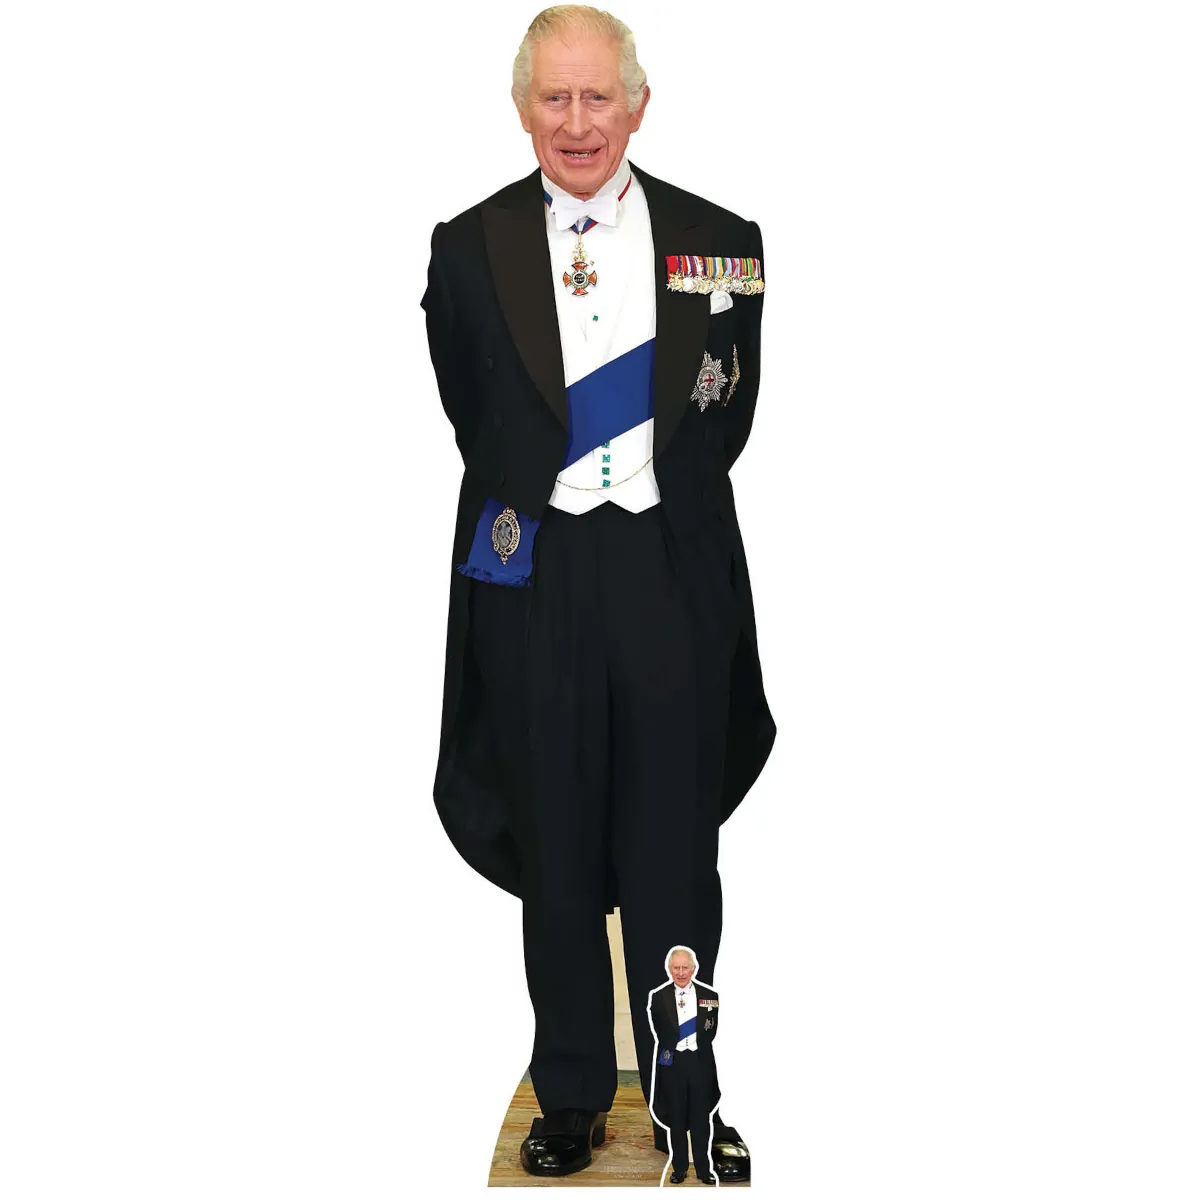 SC4231 King Charles III 'Medals' (British Royal) Lifesize + Mini Cardboard Cutout Standee Front